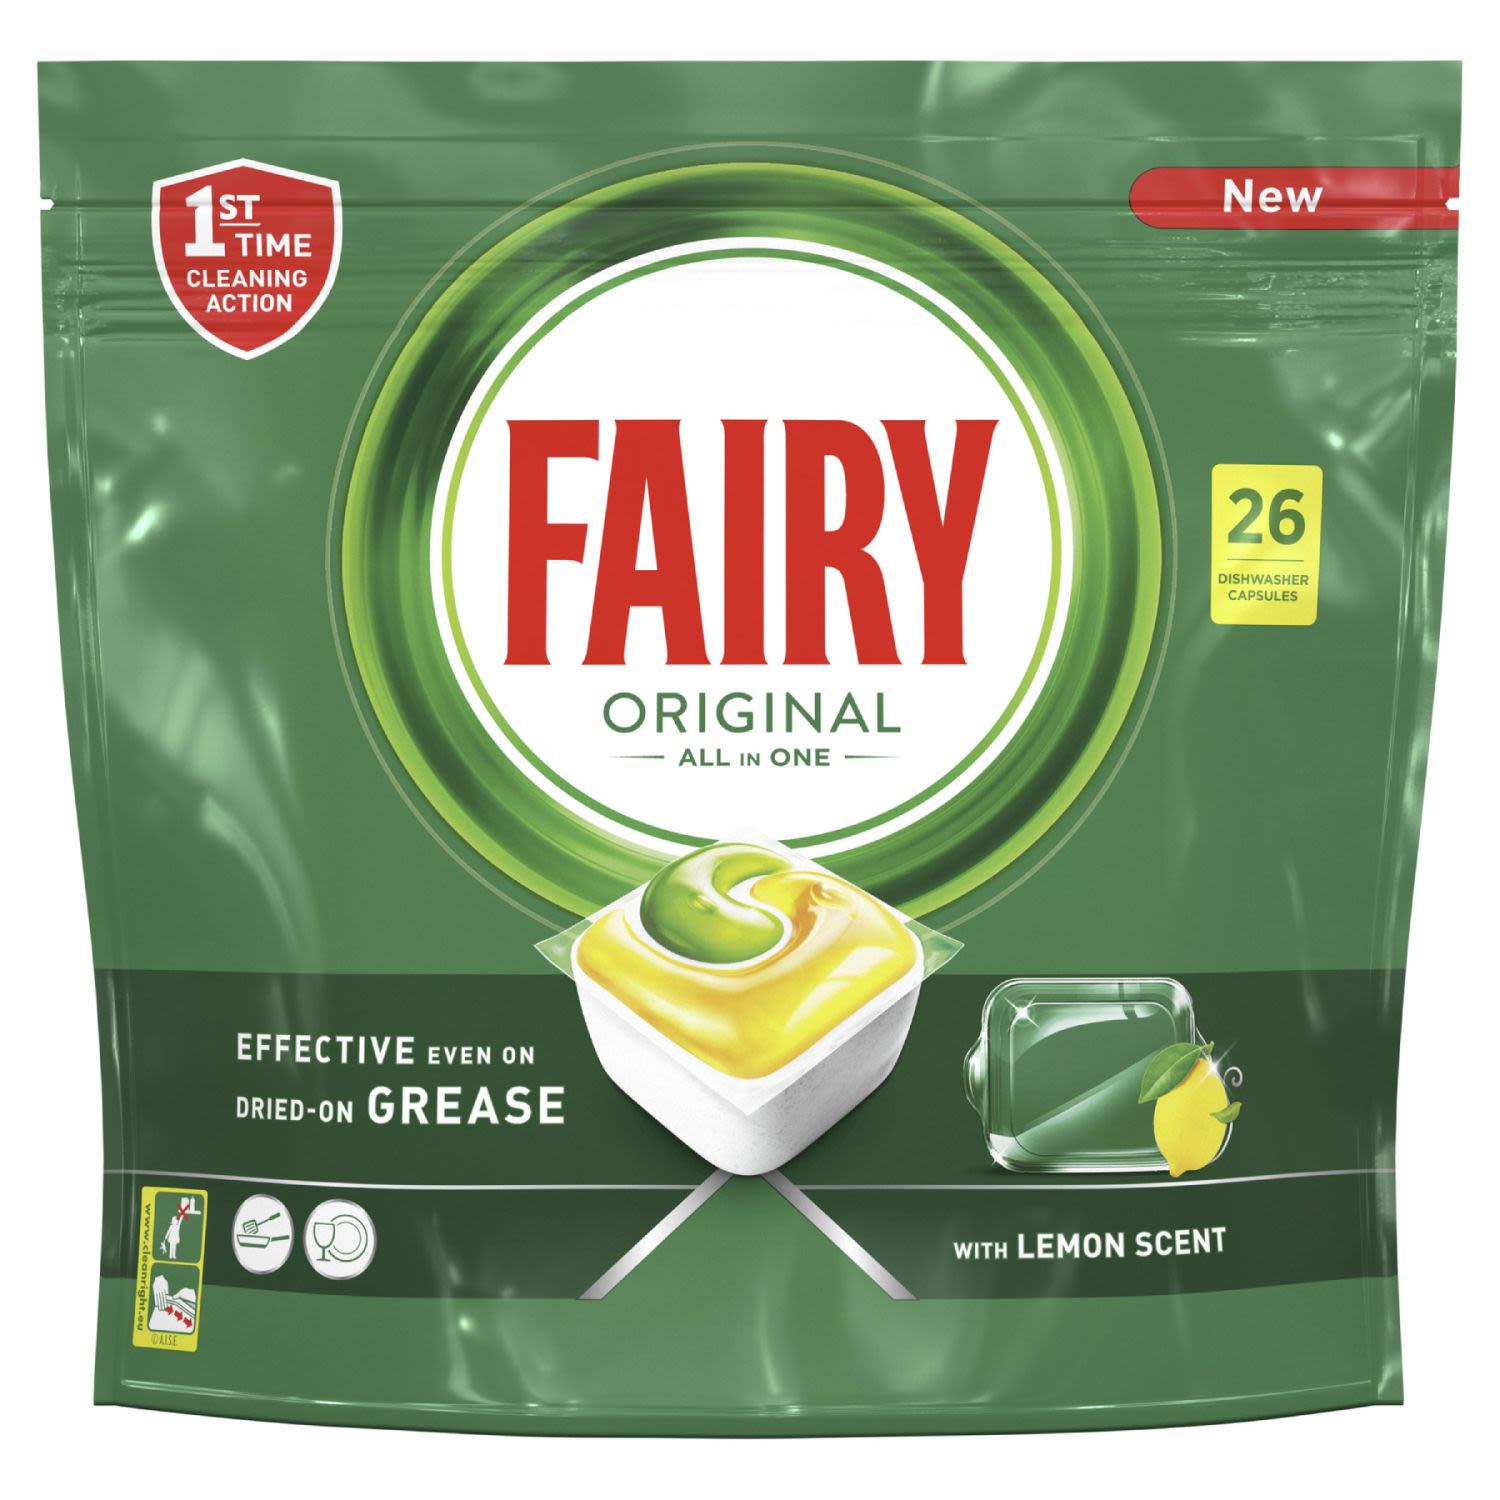 Fairy Original All in One Automatic Dishwasher Tablets, 26 Each